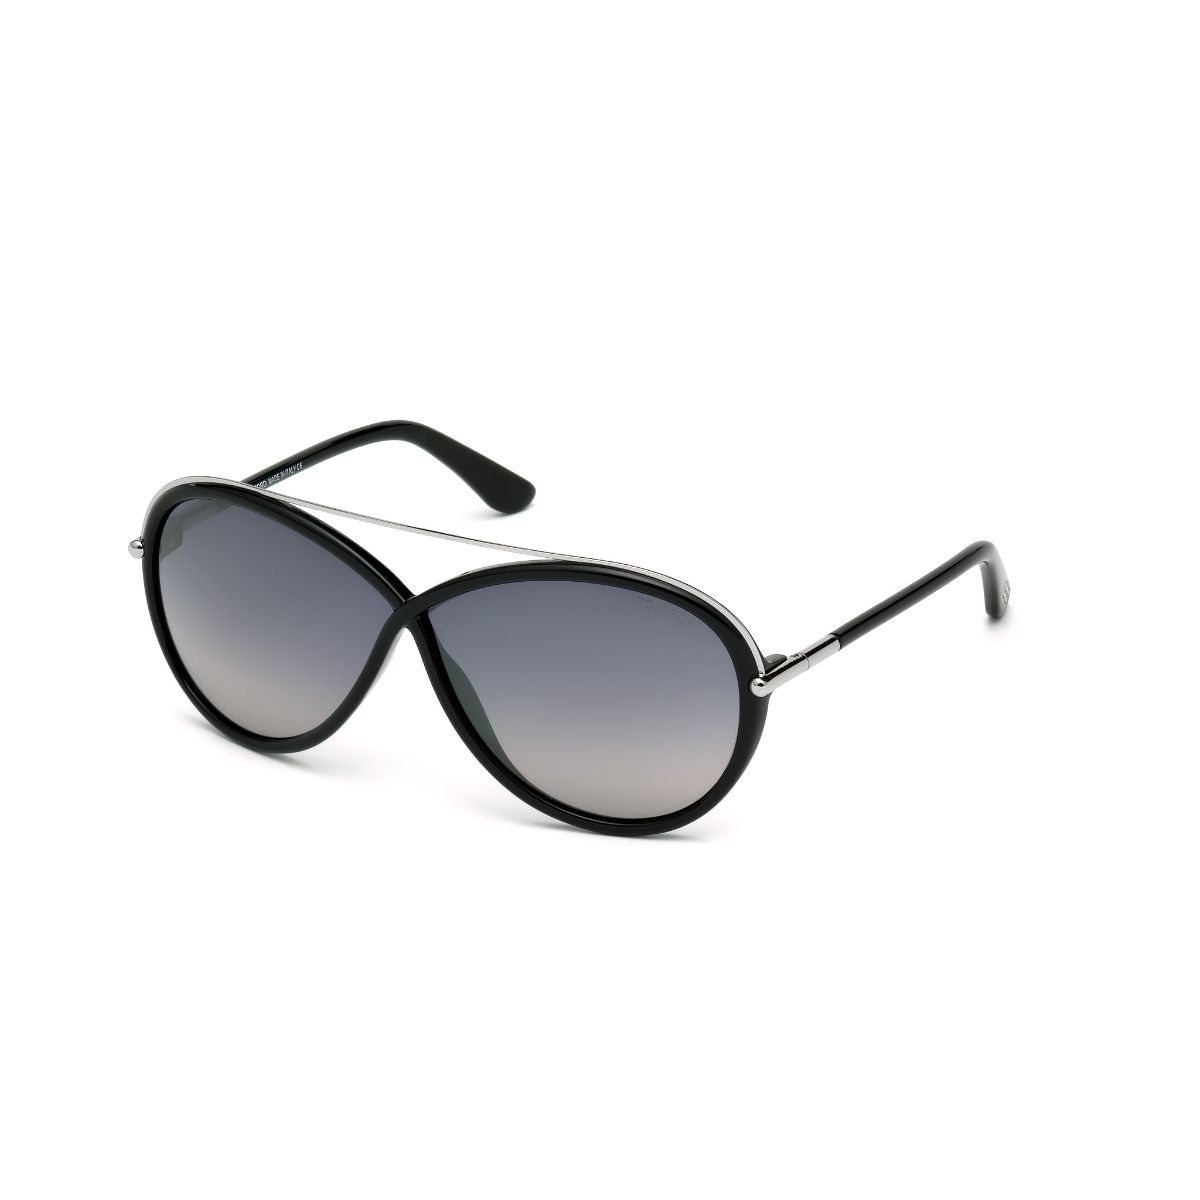 Tom Ford FT0454 64 01c Iconic Butterfly Shapes In Premium Acetate  Sunglasses: Buy Tom Ford FT0454 64 01c Iconic Butterfly Shapes In Premium  Acetate Sunglasses Online at Best Price in India | Nykaa